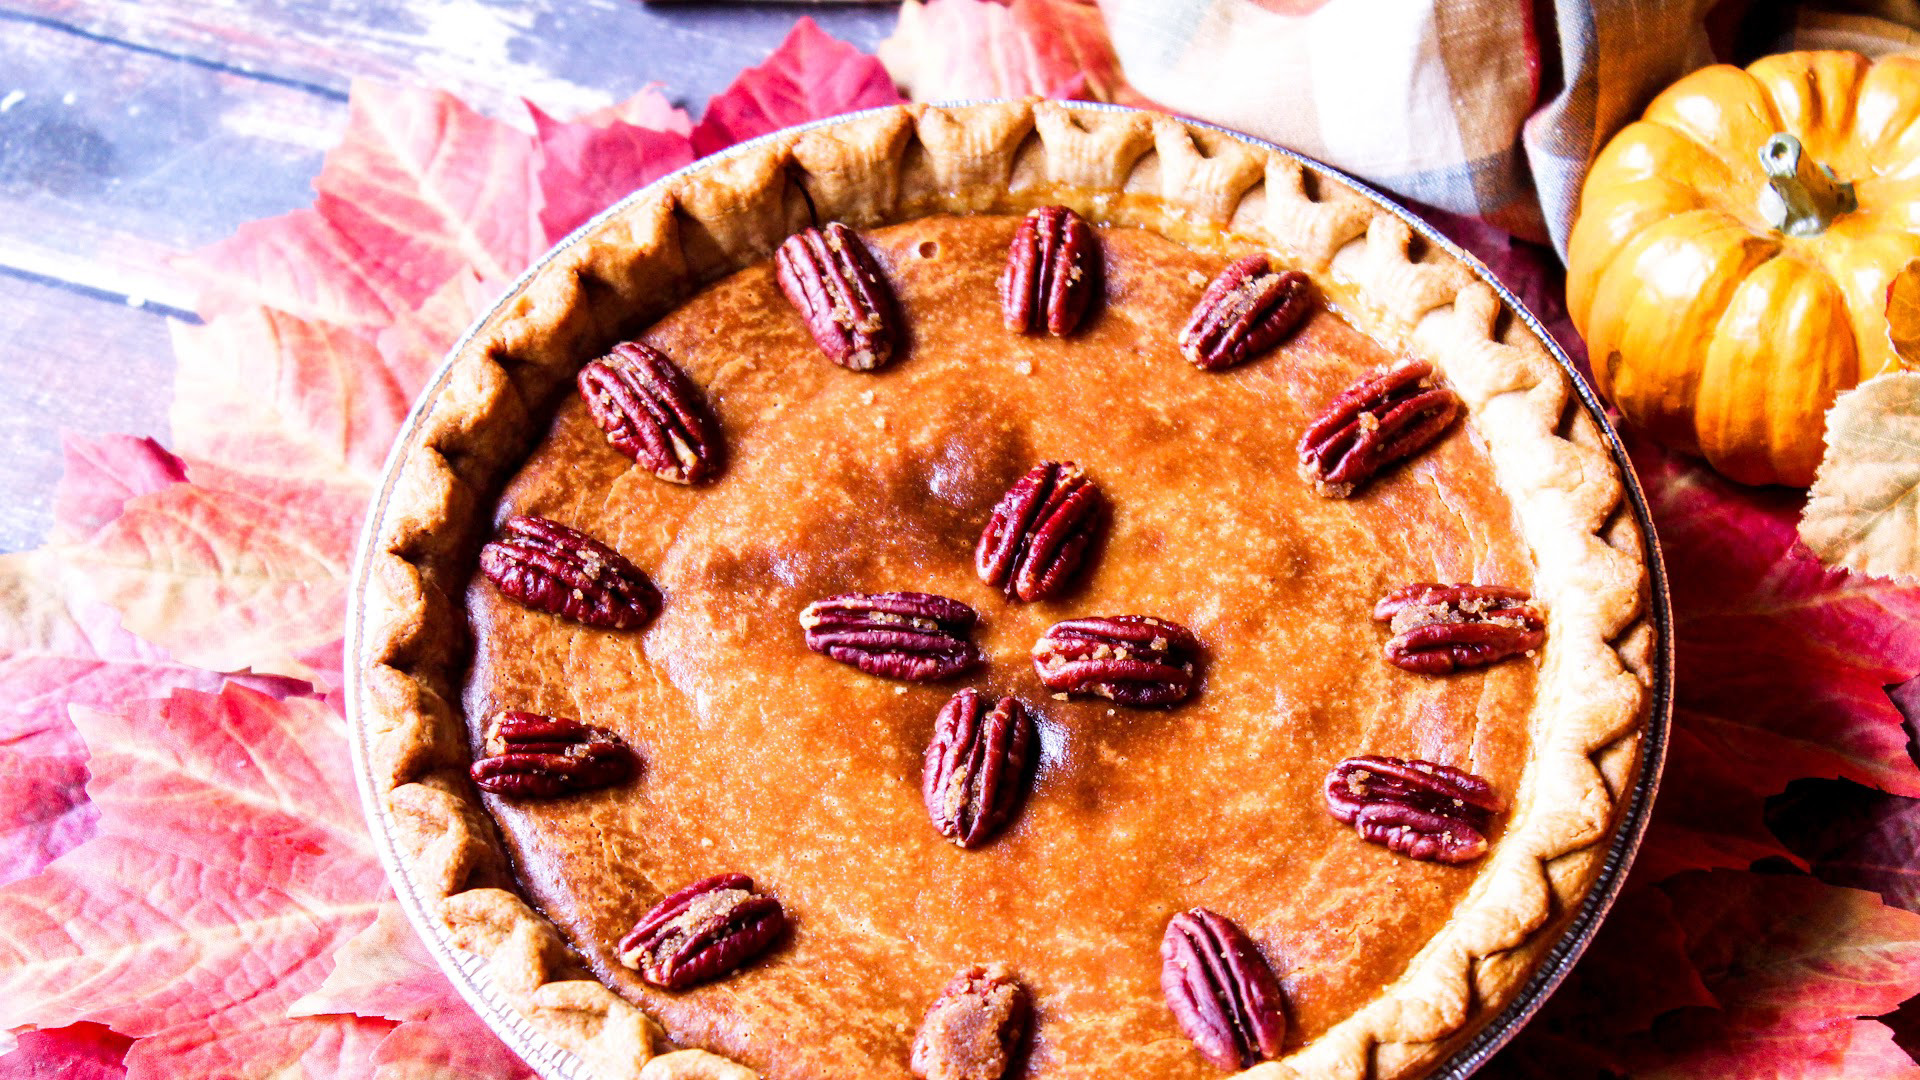 We Love Cecelia's Choice Of Spices In This Creamy Pumpkin Pie Recipe ...